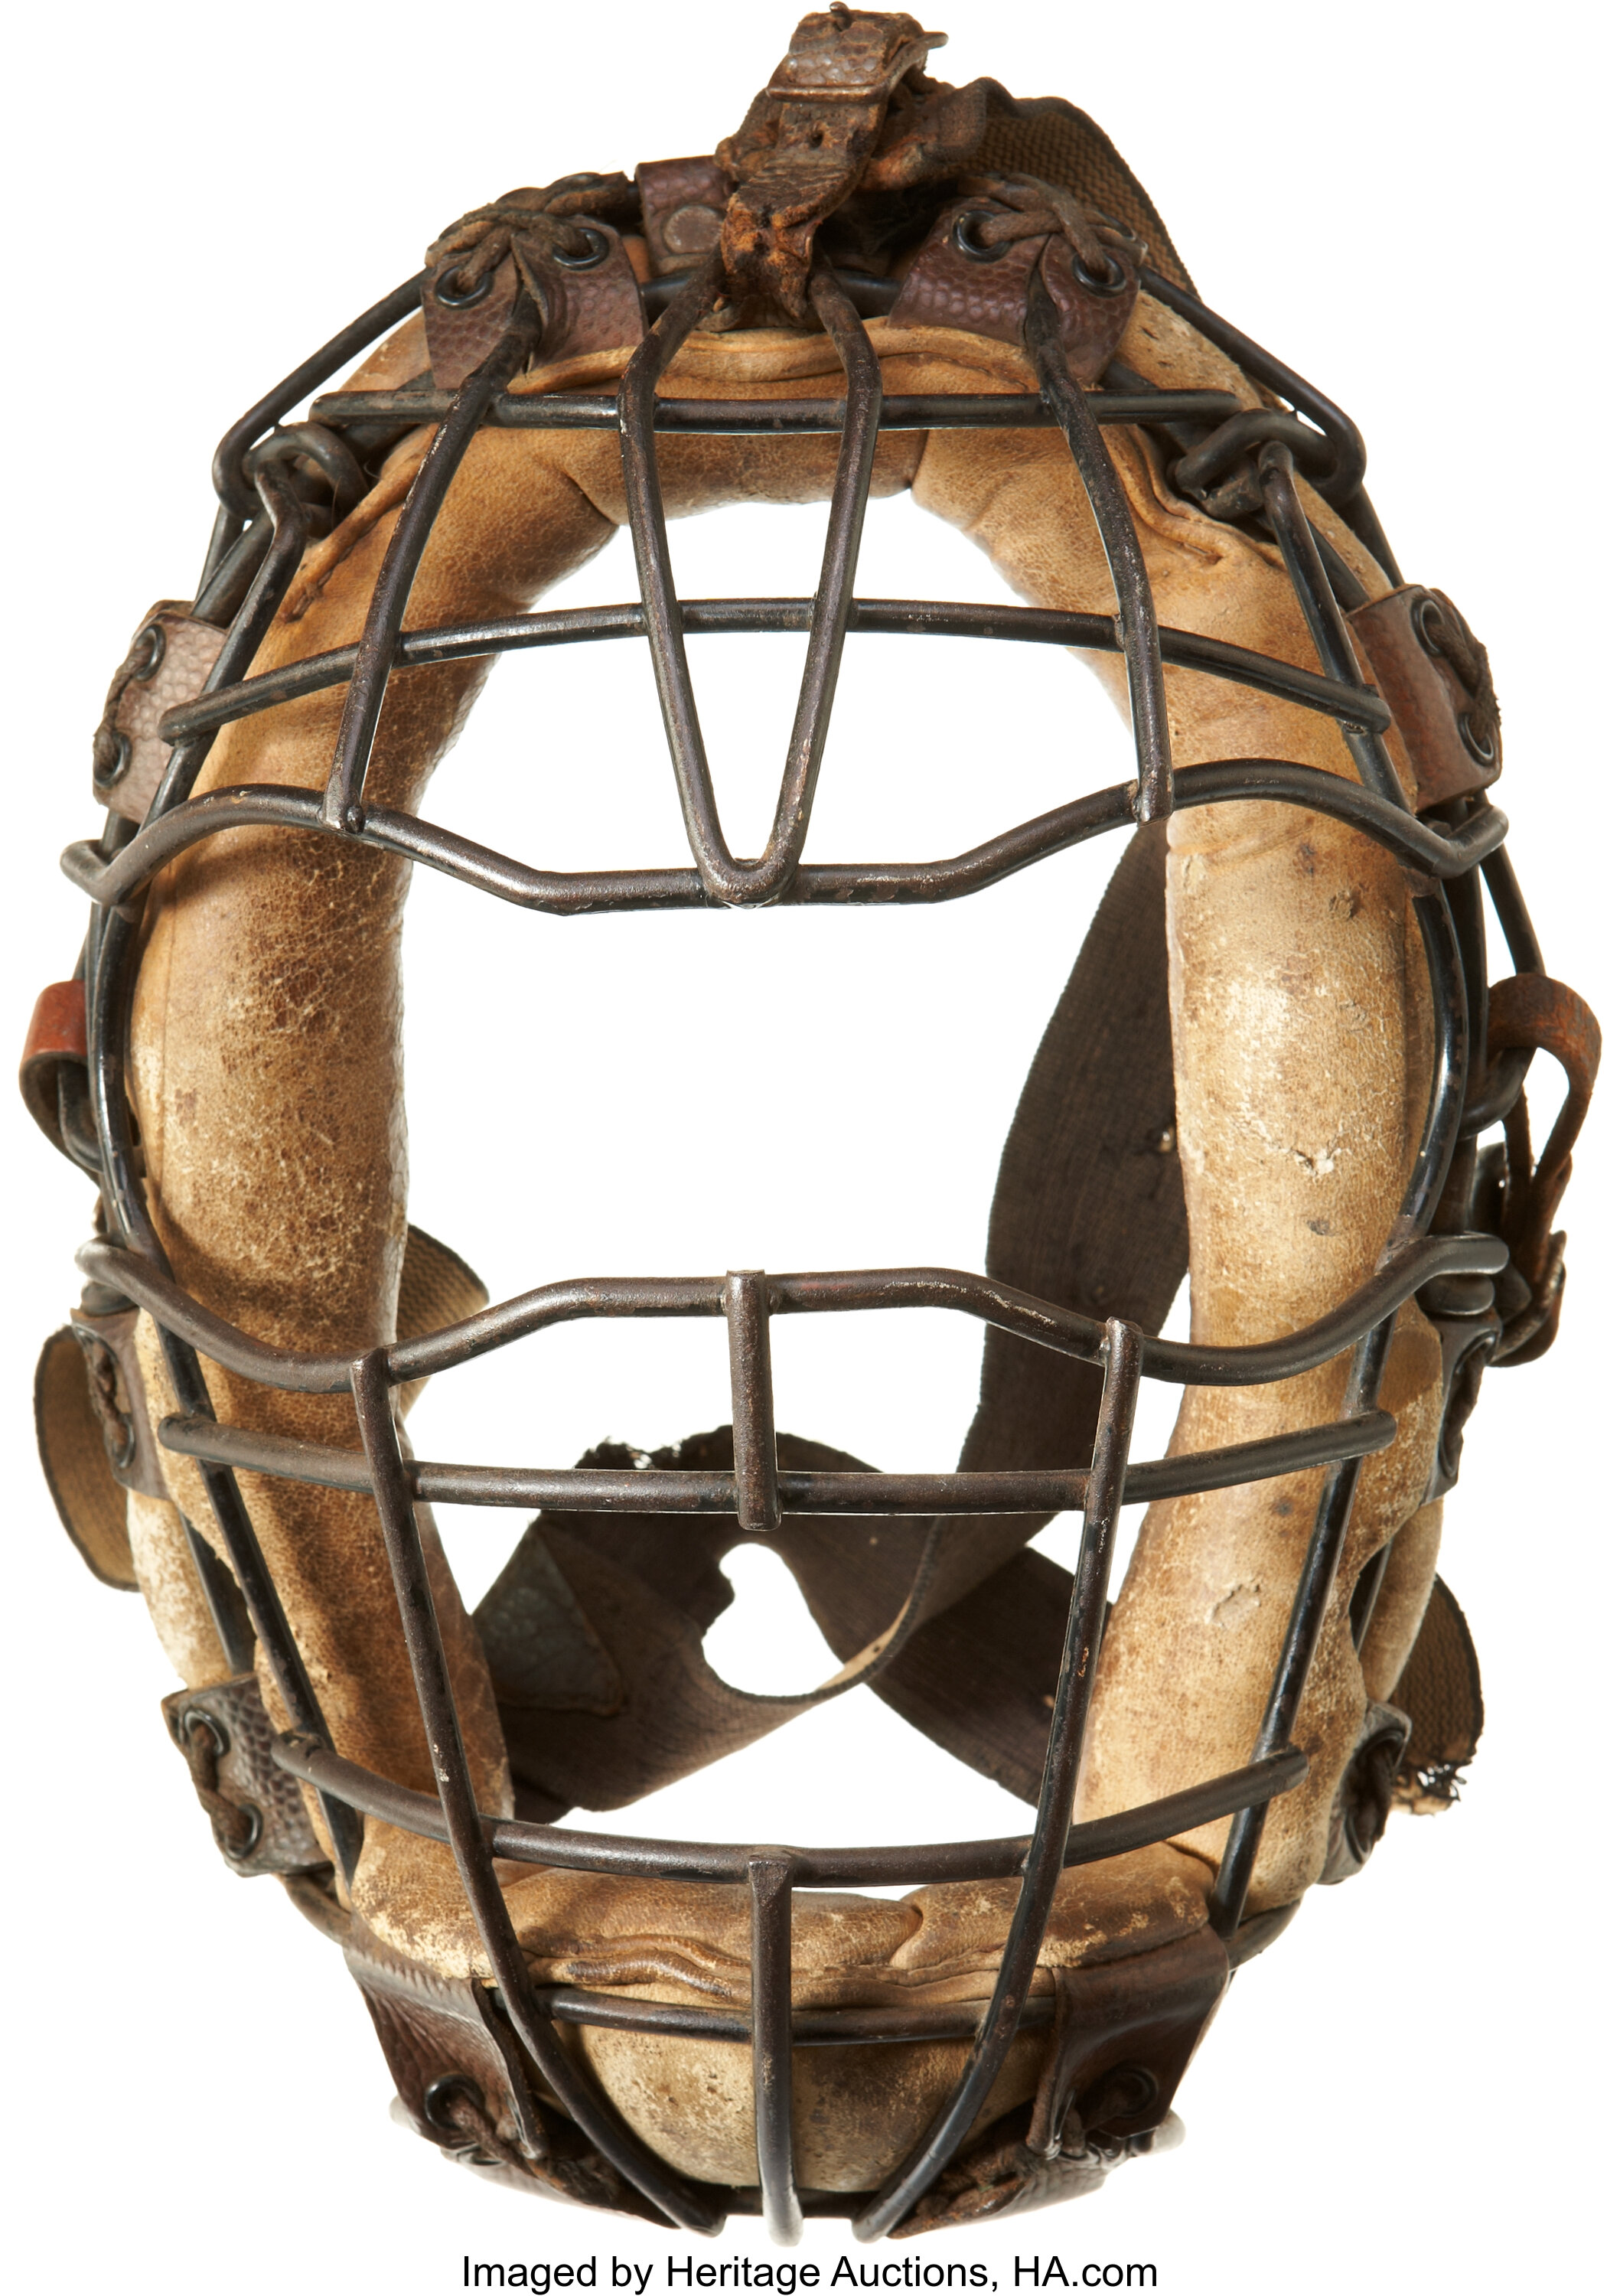 Circa 1920 D&M Catcher's Mask. Baseball Collectibles Others, Lot #44124